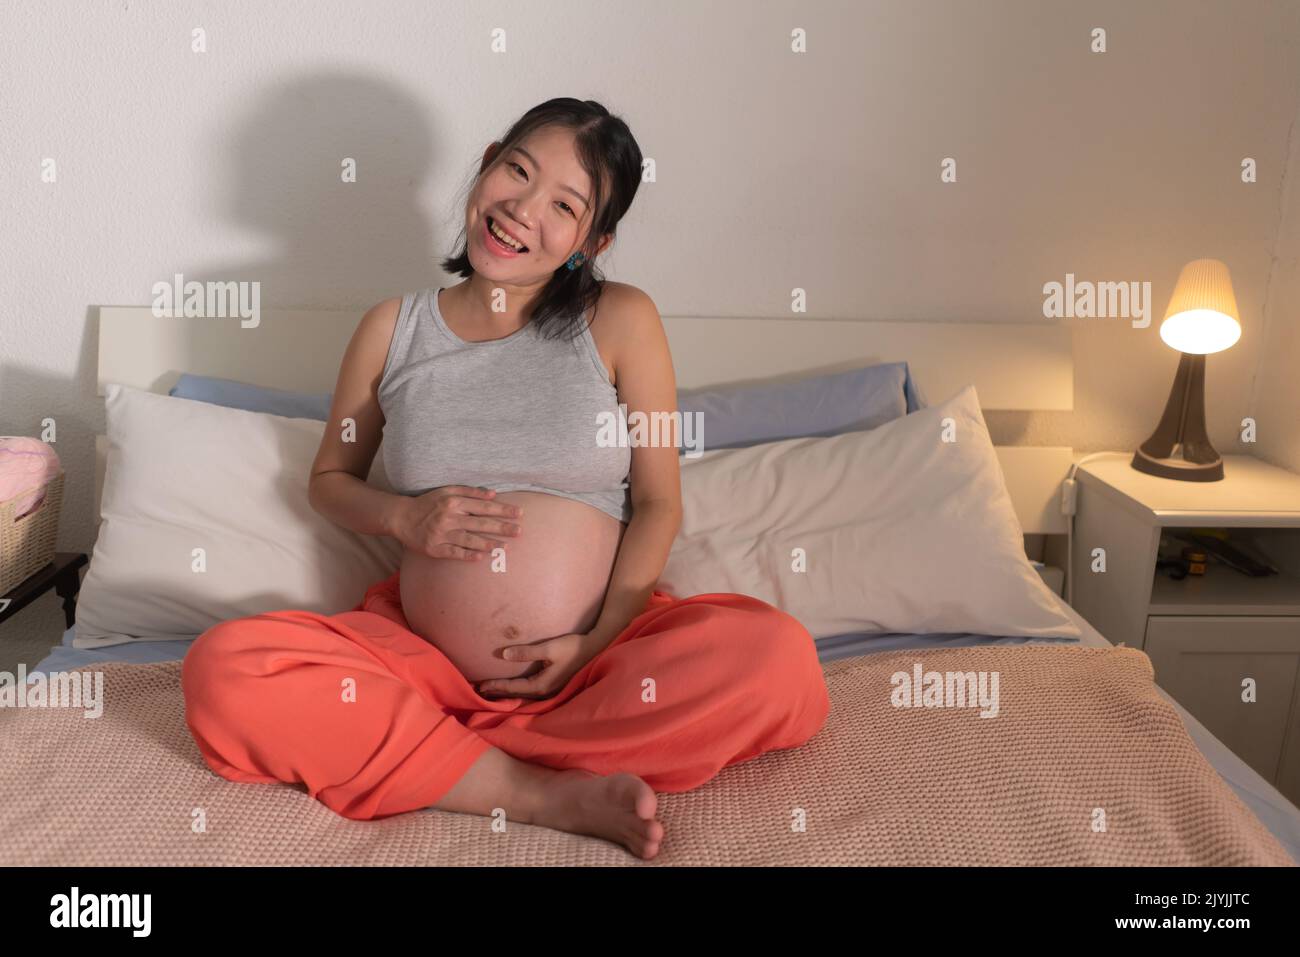 lifestyle home portrait of young happy and beautiful Asian Chinese woman pregnant sitting on bed relaxed and excited about maternity touching her bell Stock Photo